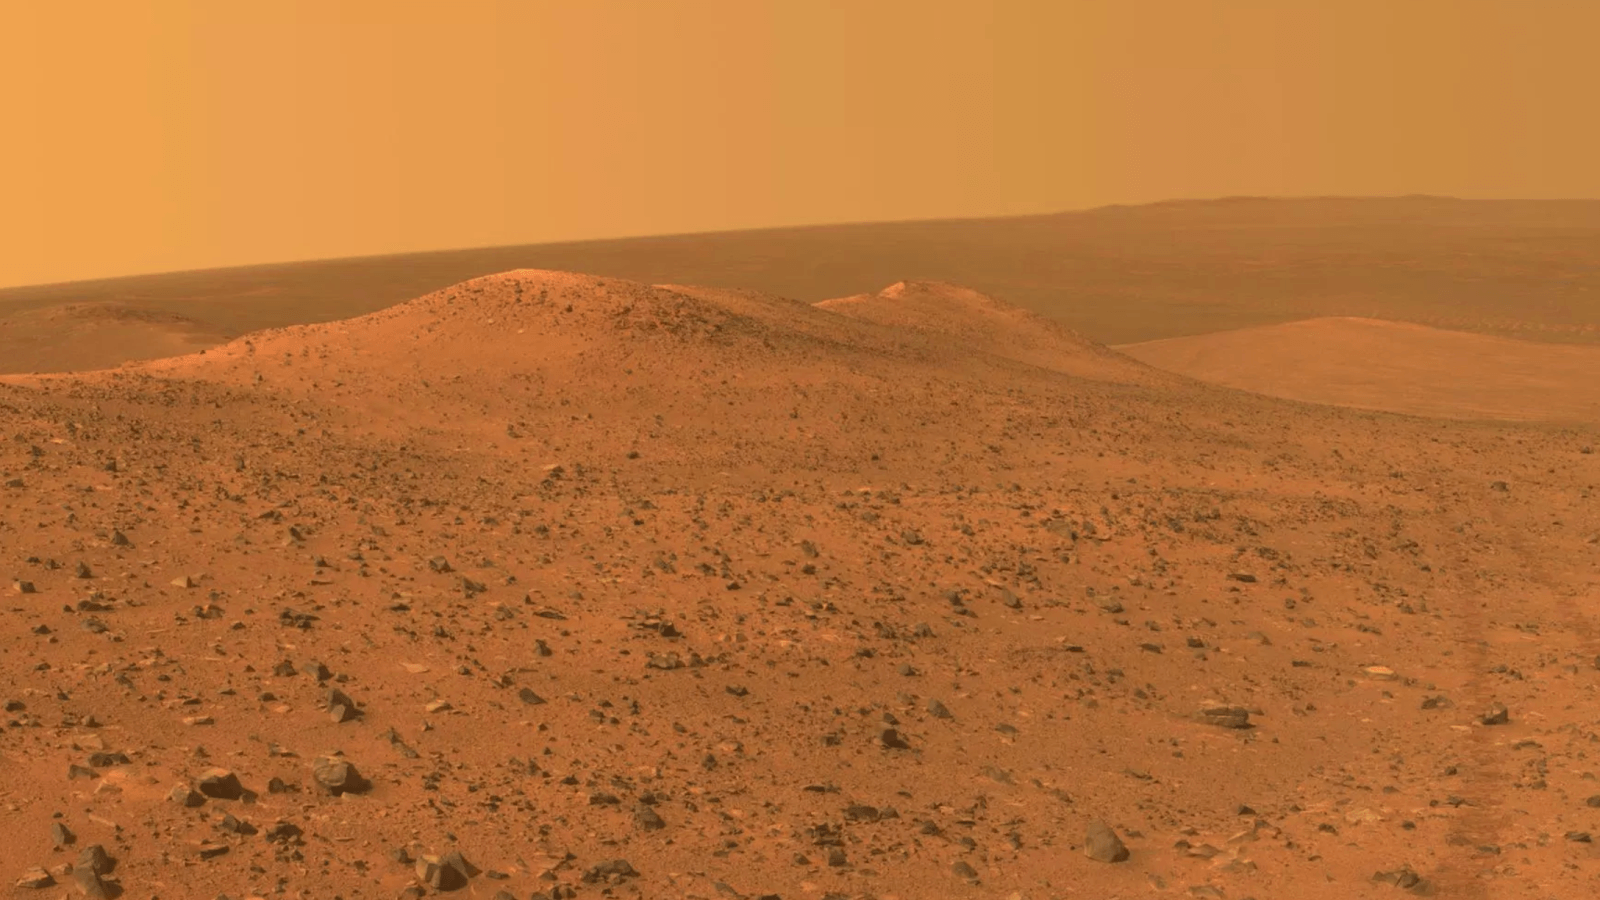 NASA Opportunity rover picture: 15 years of image from Mars